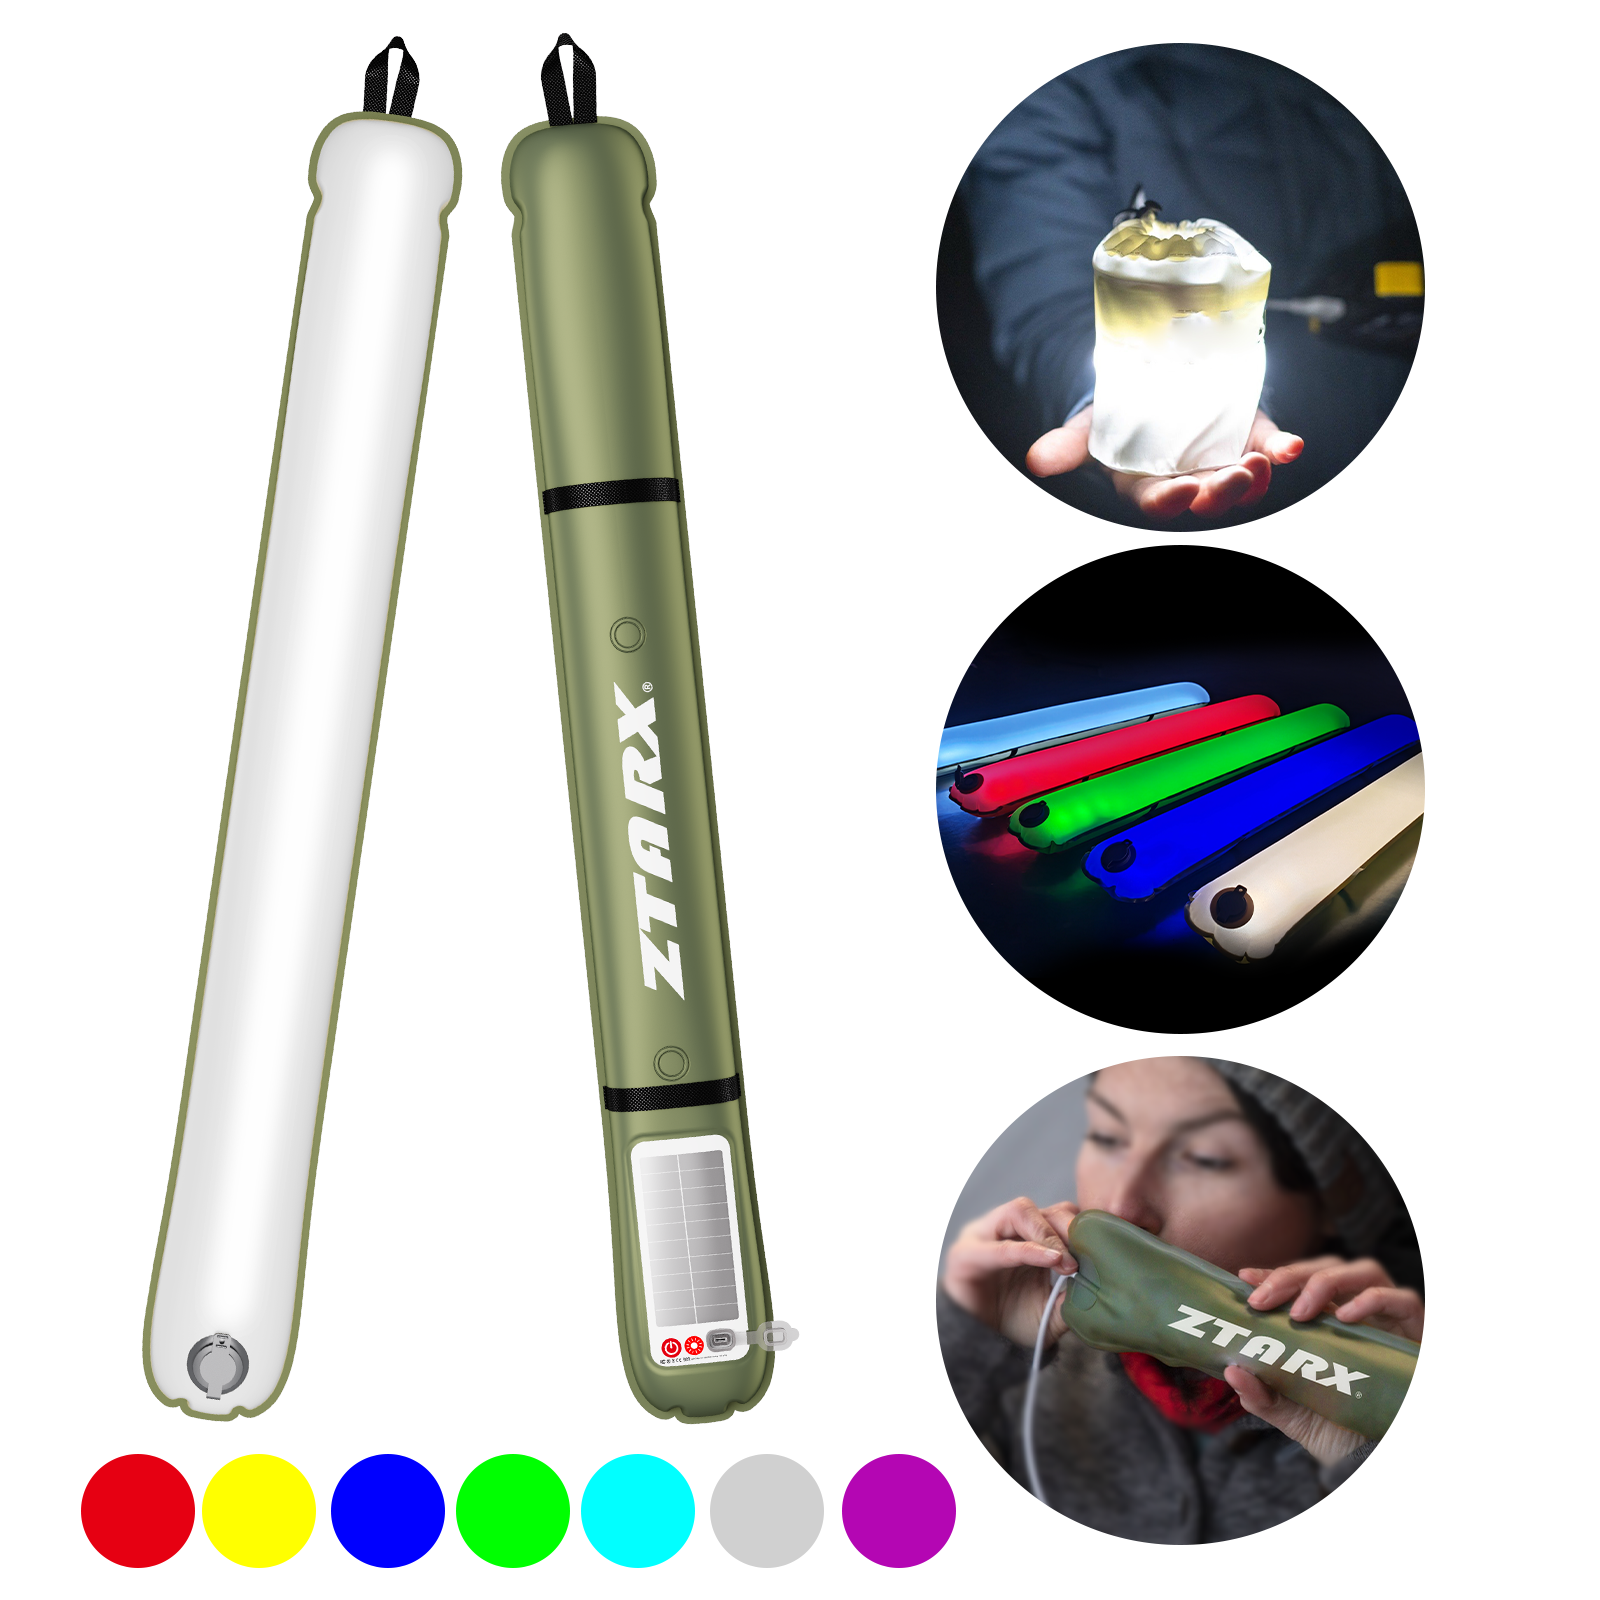 Ztarx Tube-A2.0-86 Rainbow LED Tube with Solar & USB Charging Built-in Battery